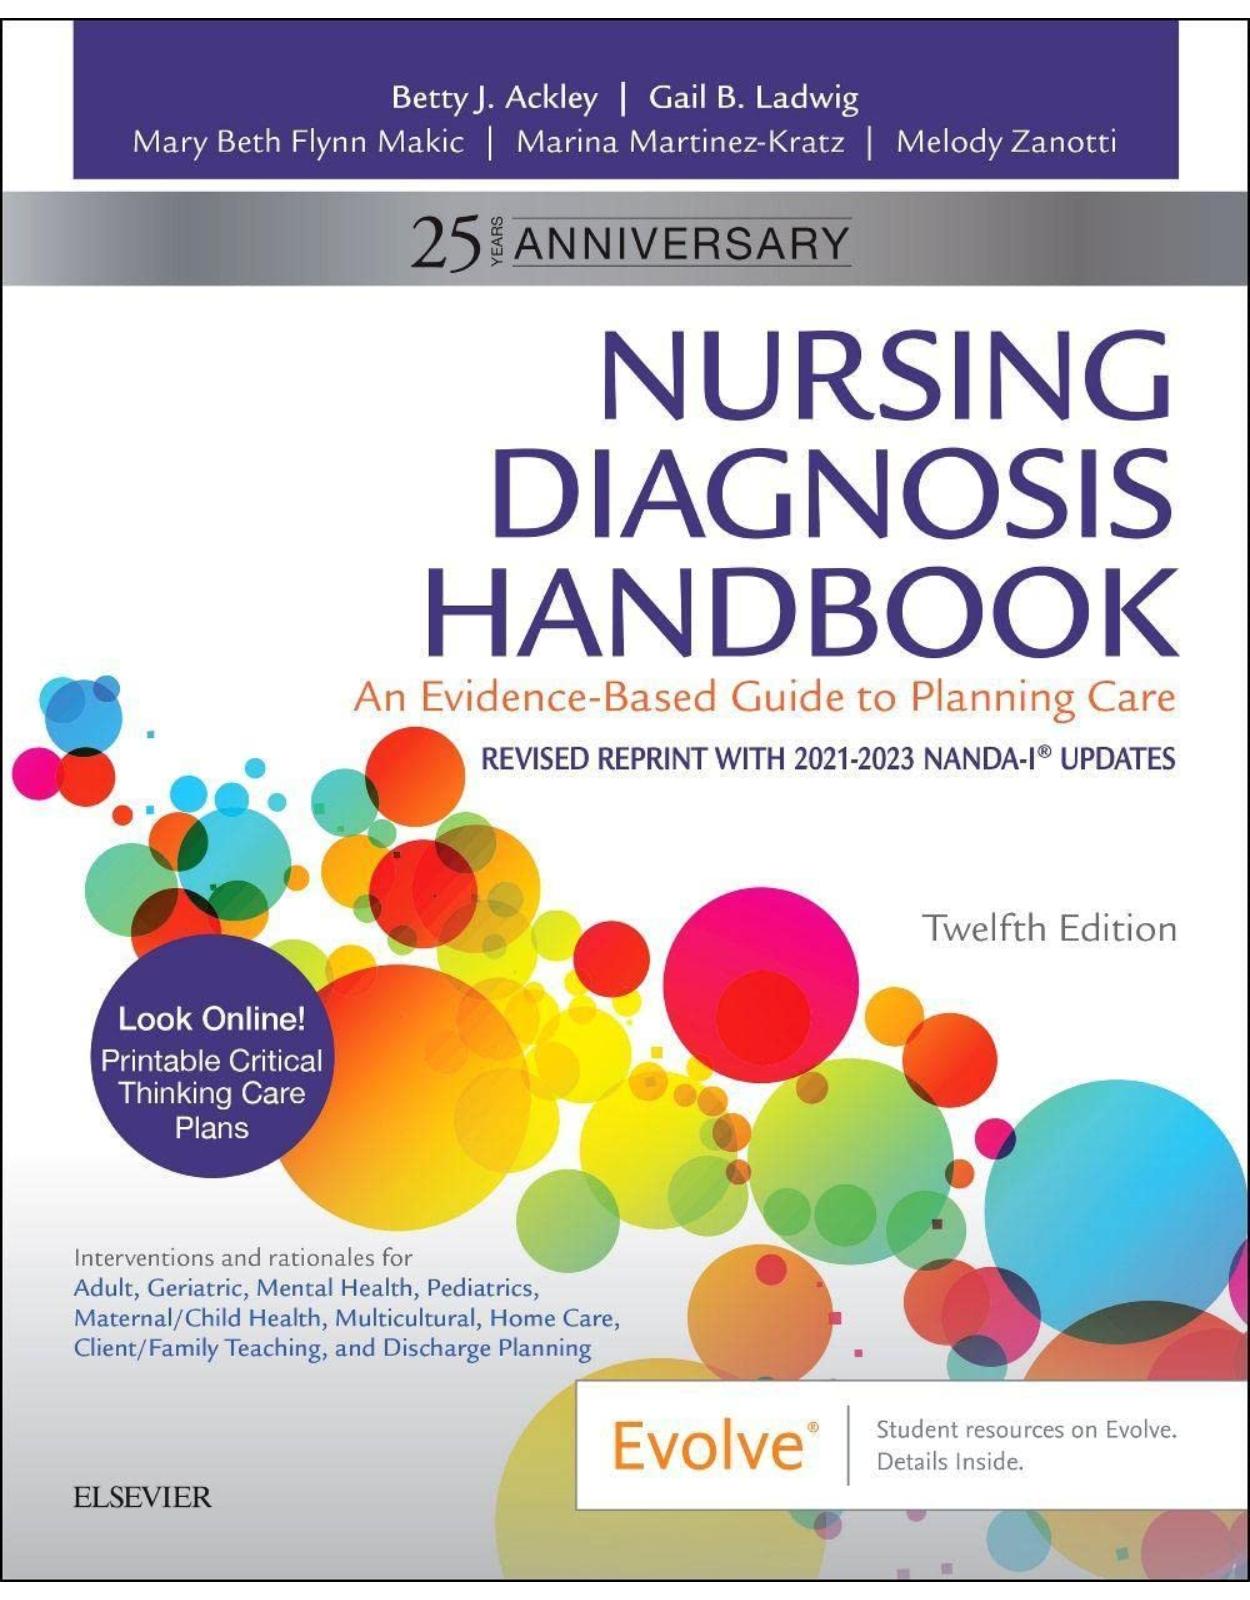 Nursing Diagnosis Handbook: An Evidence-Based Guide to Planning Care, 12e